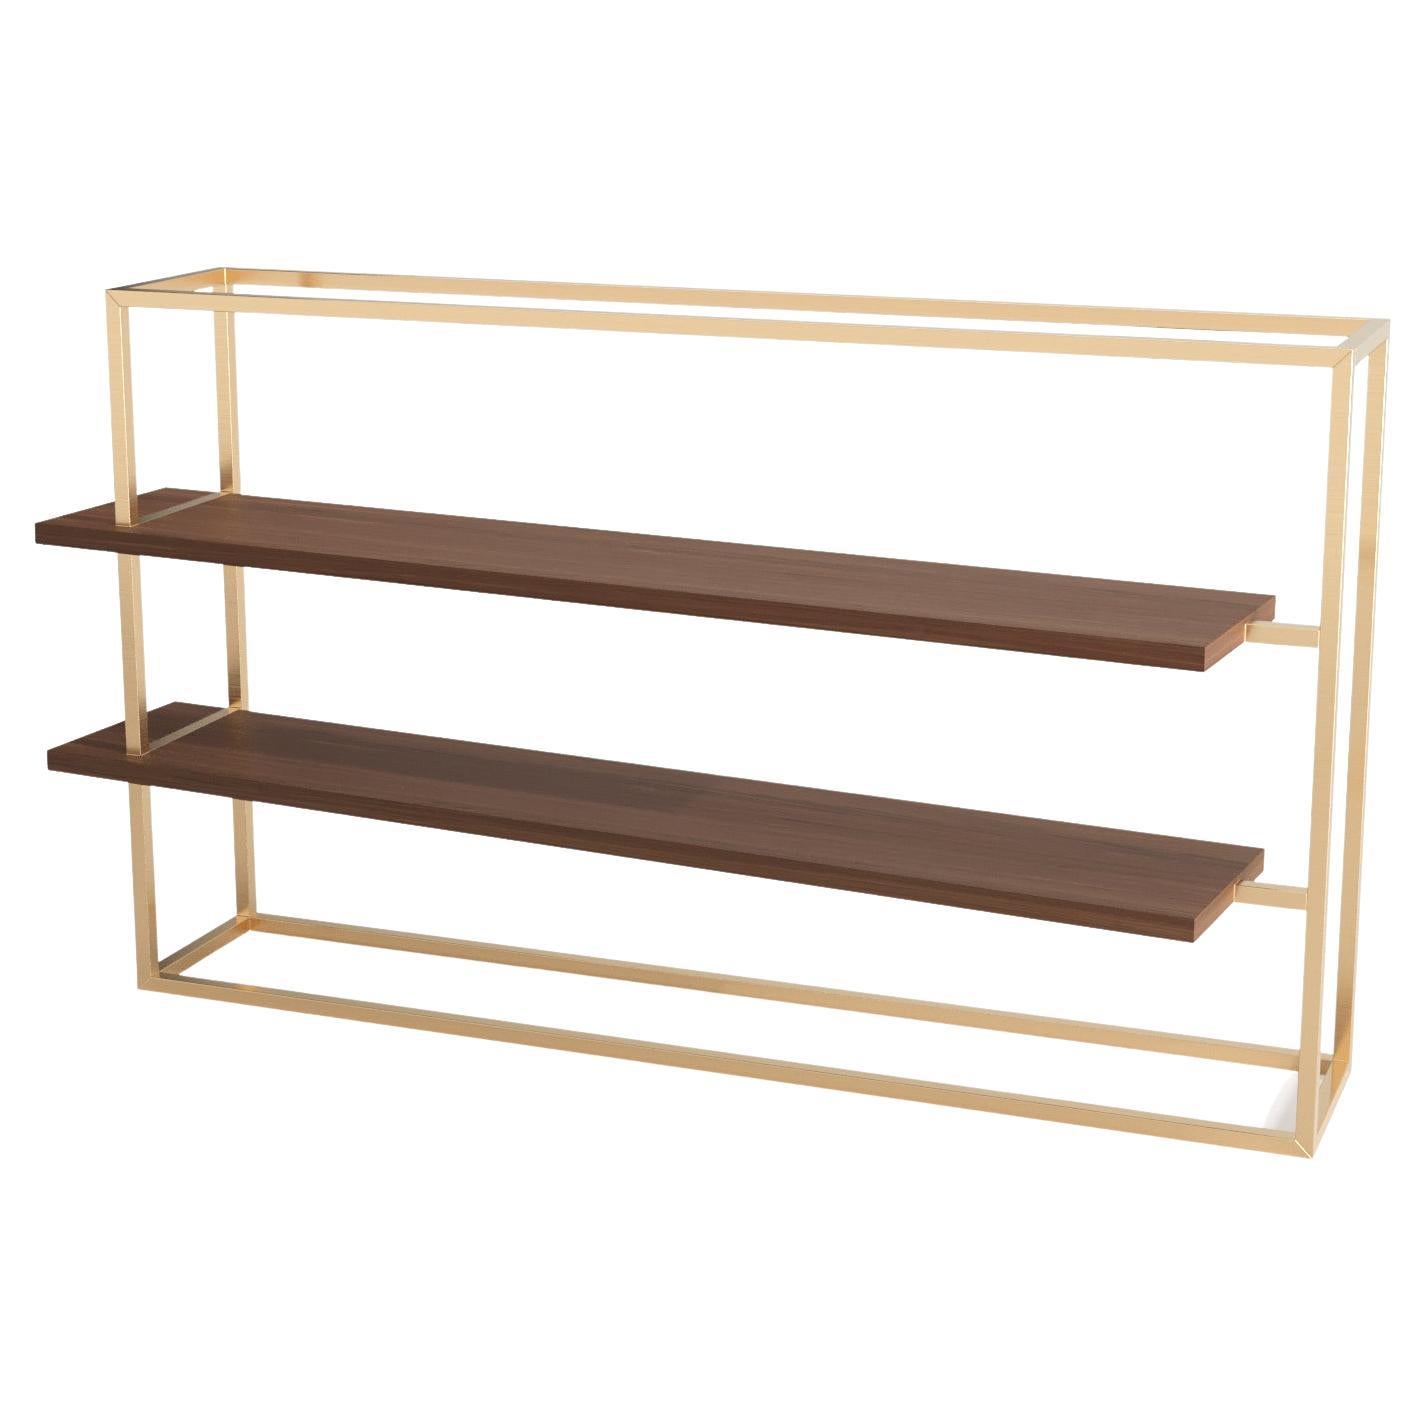 Contemporary Modern Minimalist Bookcase with Shelves Oak Wood Brushed Stainless Steel For Sale